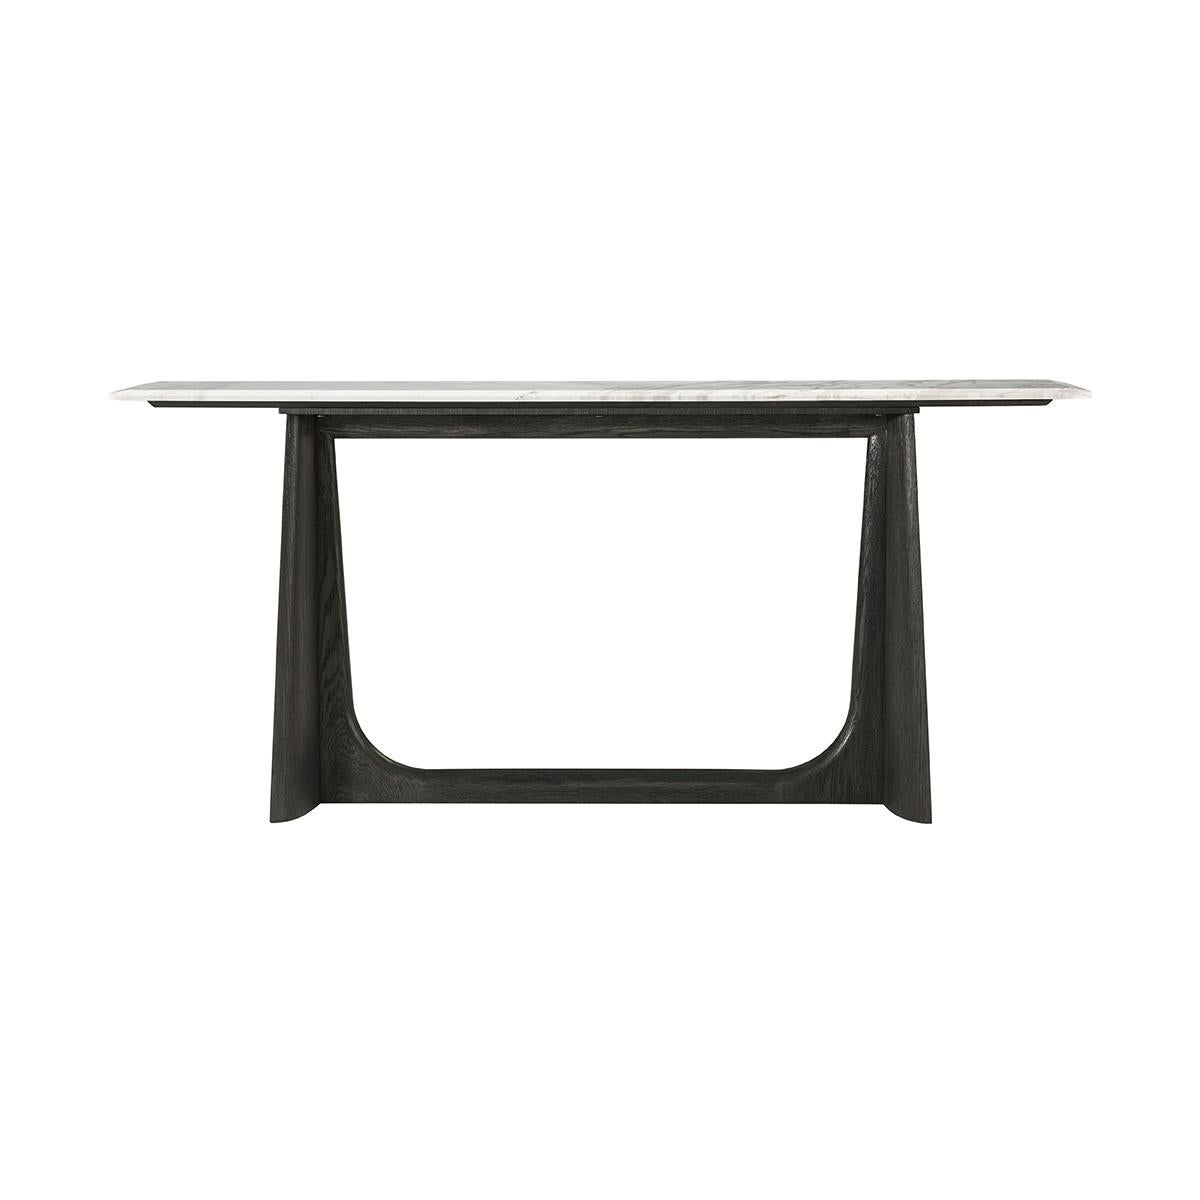 Featuring a wire-brushed white oak in our dark charcoal finish. With a Volakas marble top raised on trapezoidal form trestle ends with a stretcher.

Dimensions: 72